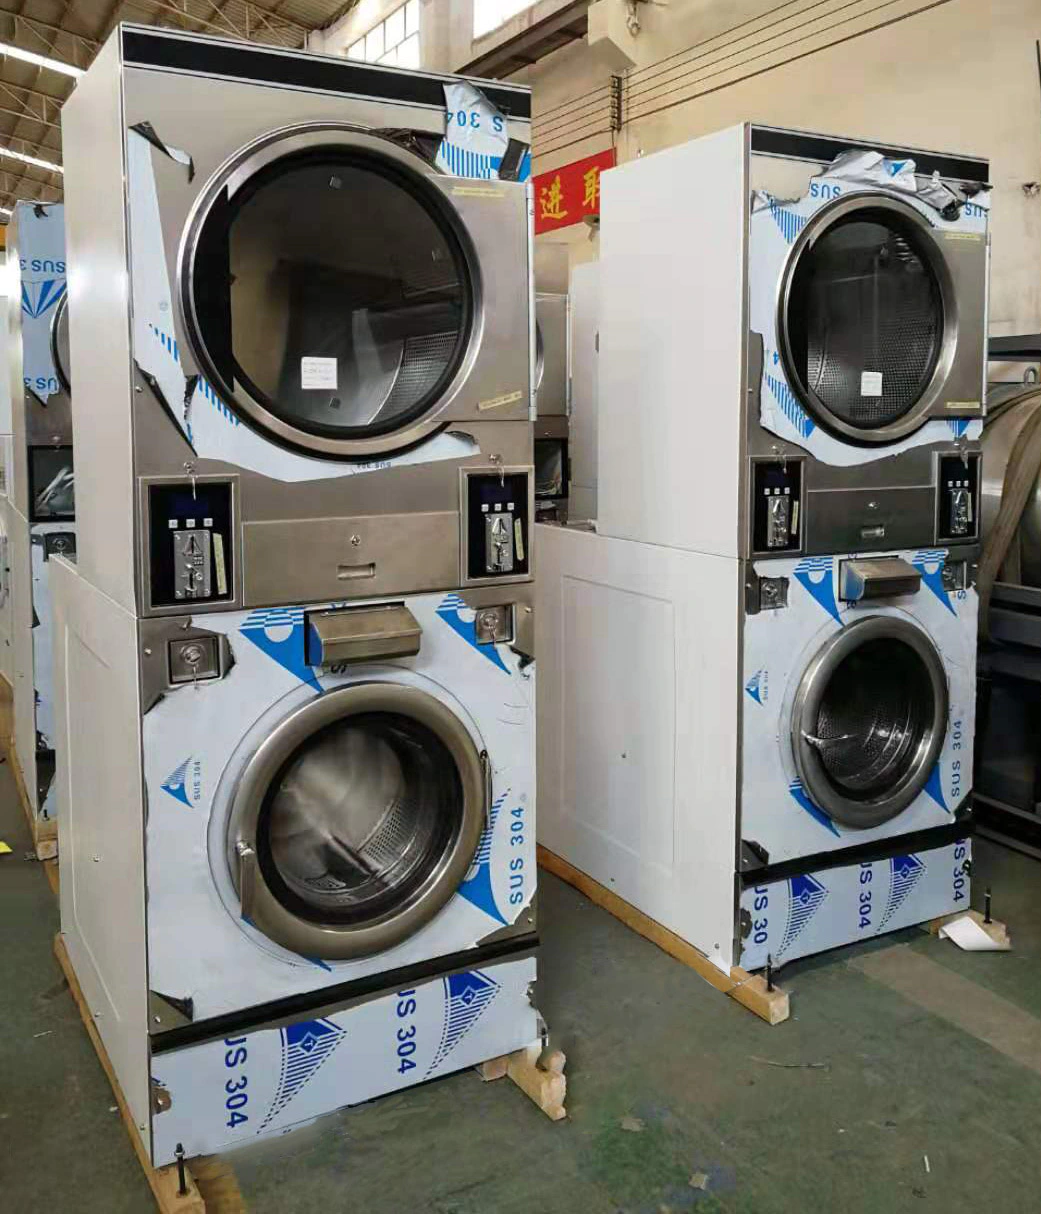 GOWORLD coin self service laundry equipment natural gas heating for service-service center